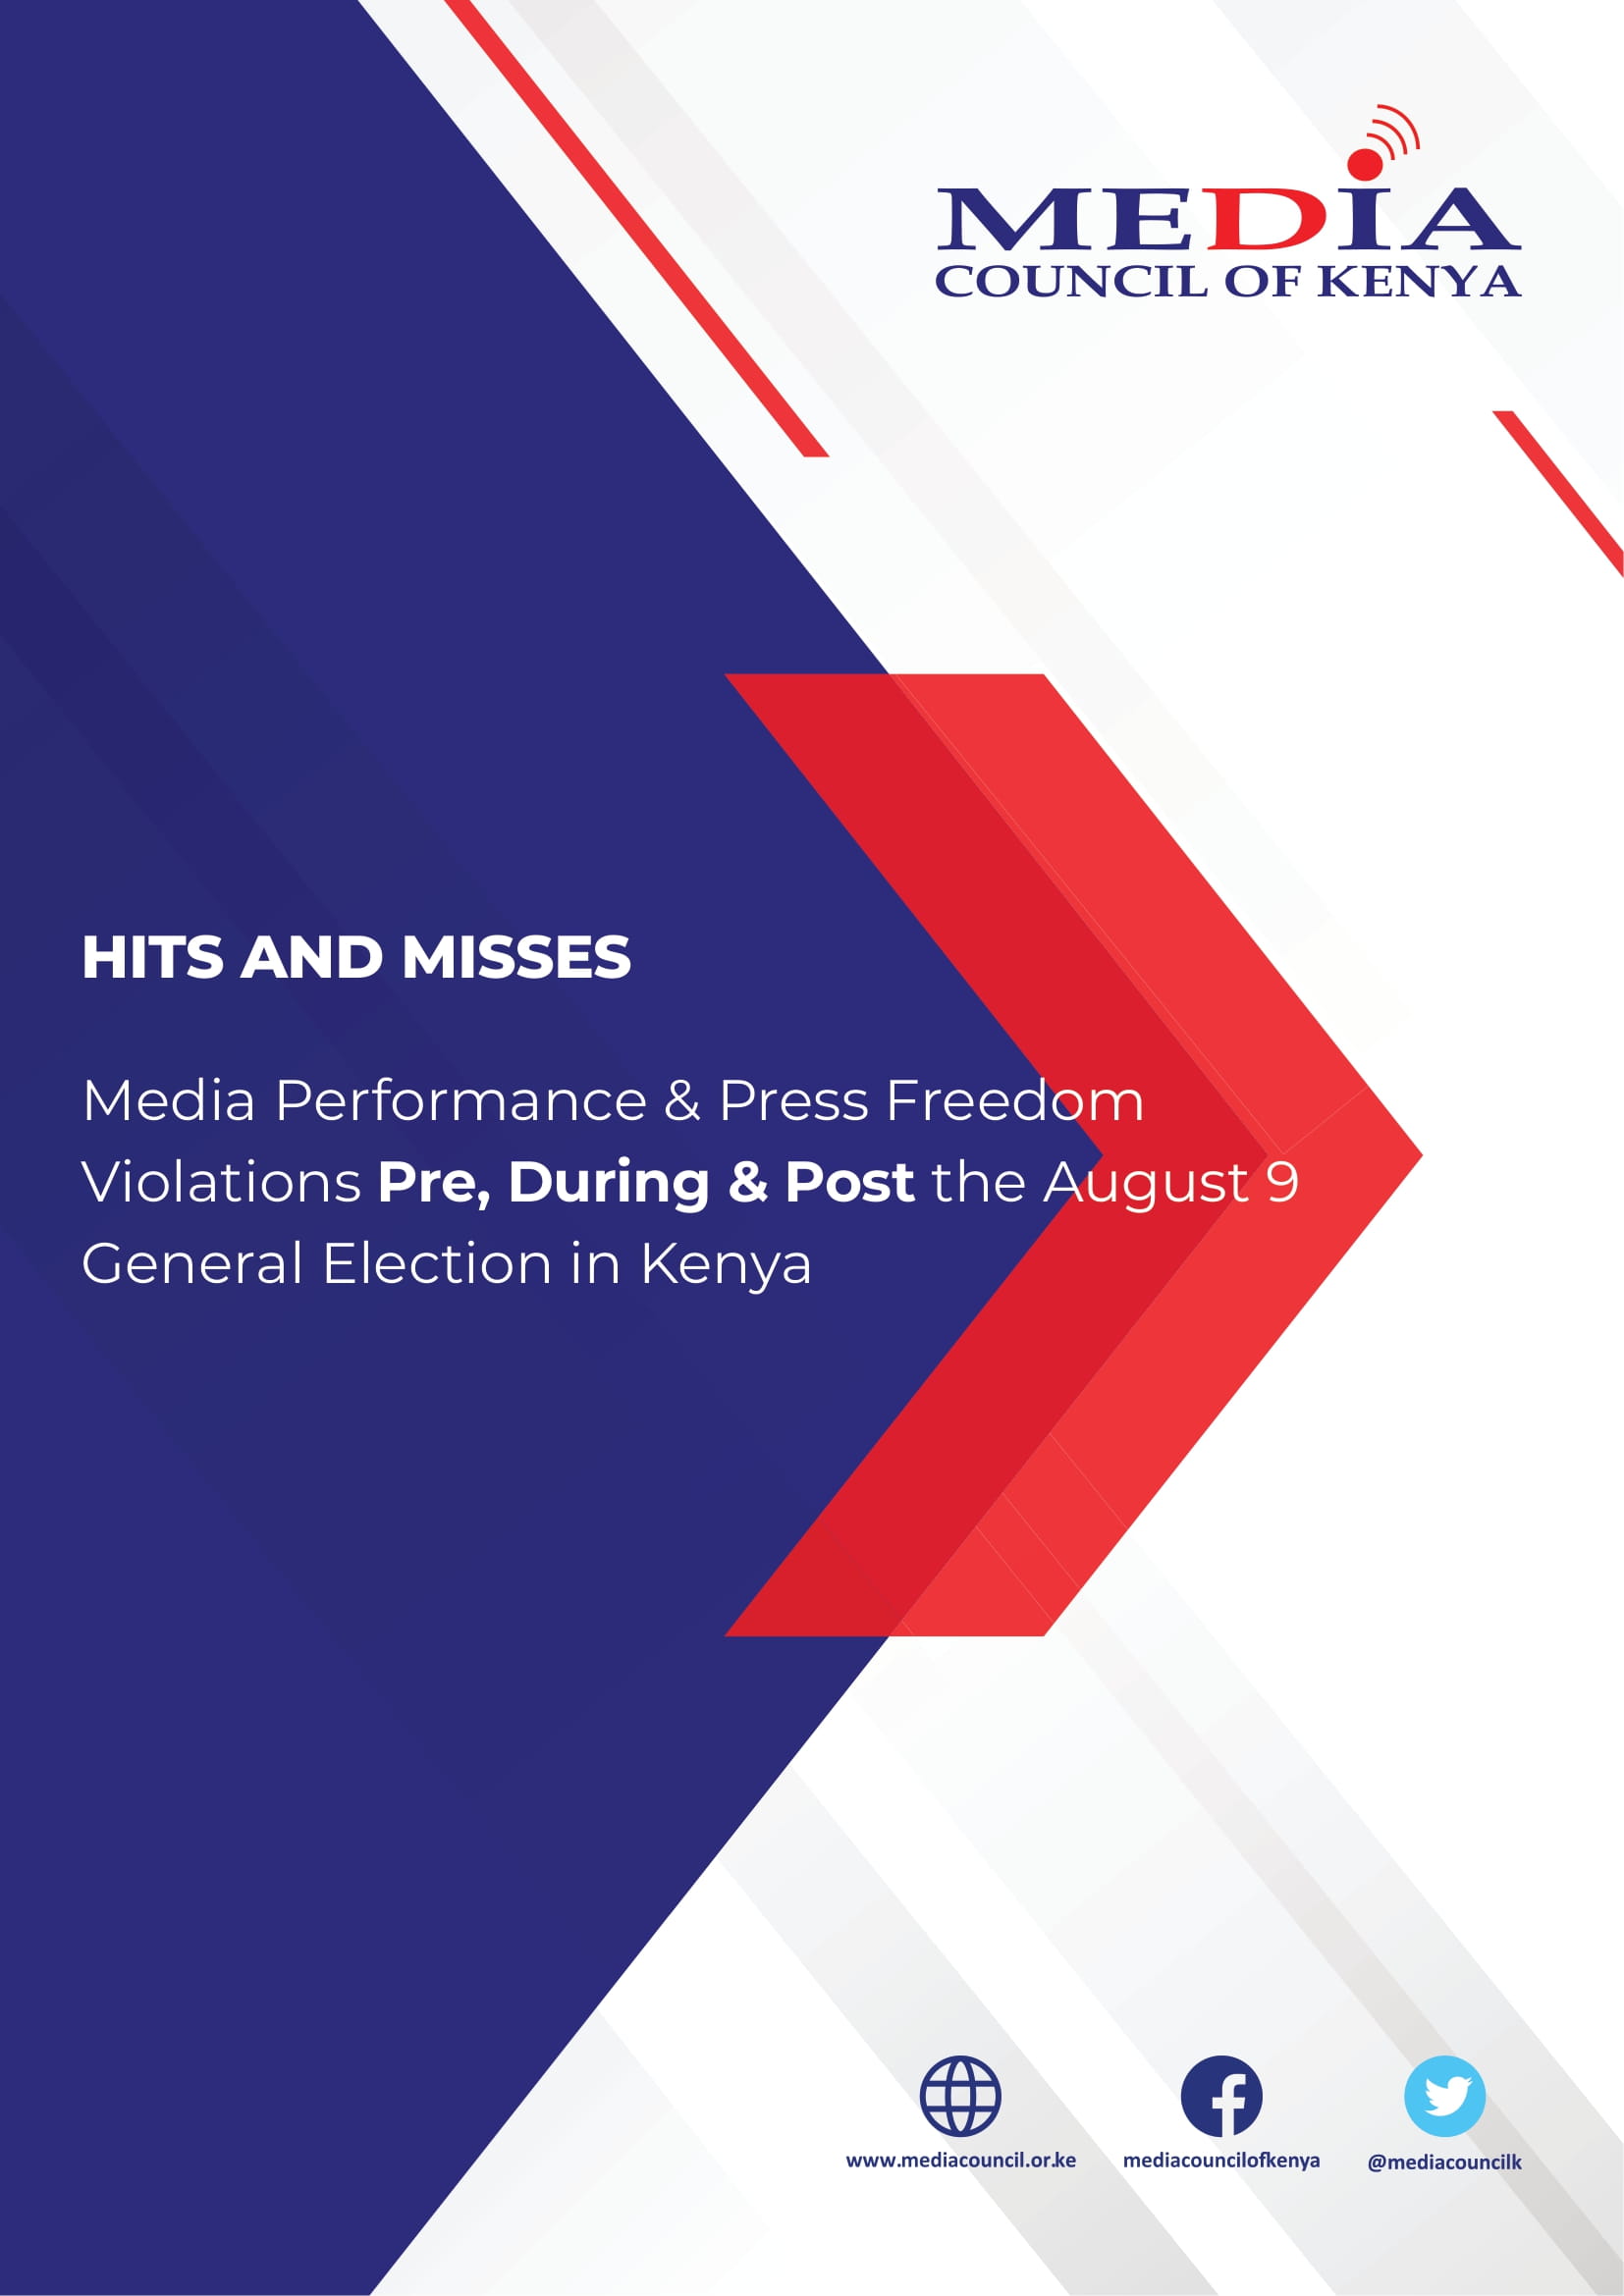 Touhou Ventana mundial Minúsculo HITS AND MISSES - Media Performance & Press Freedom Violations Pre, During  & Post the August 9 General Election in Kenya